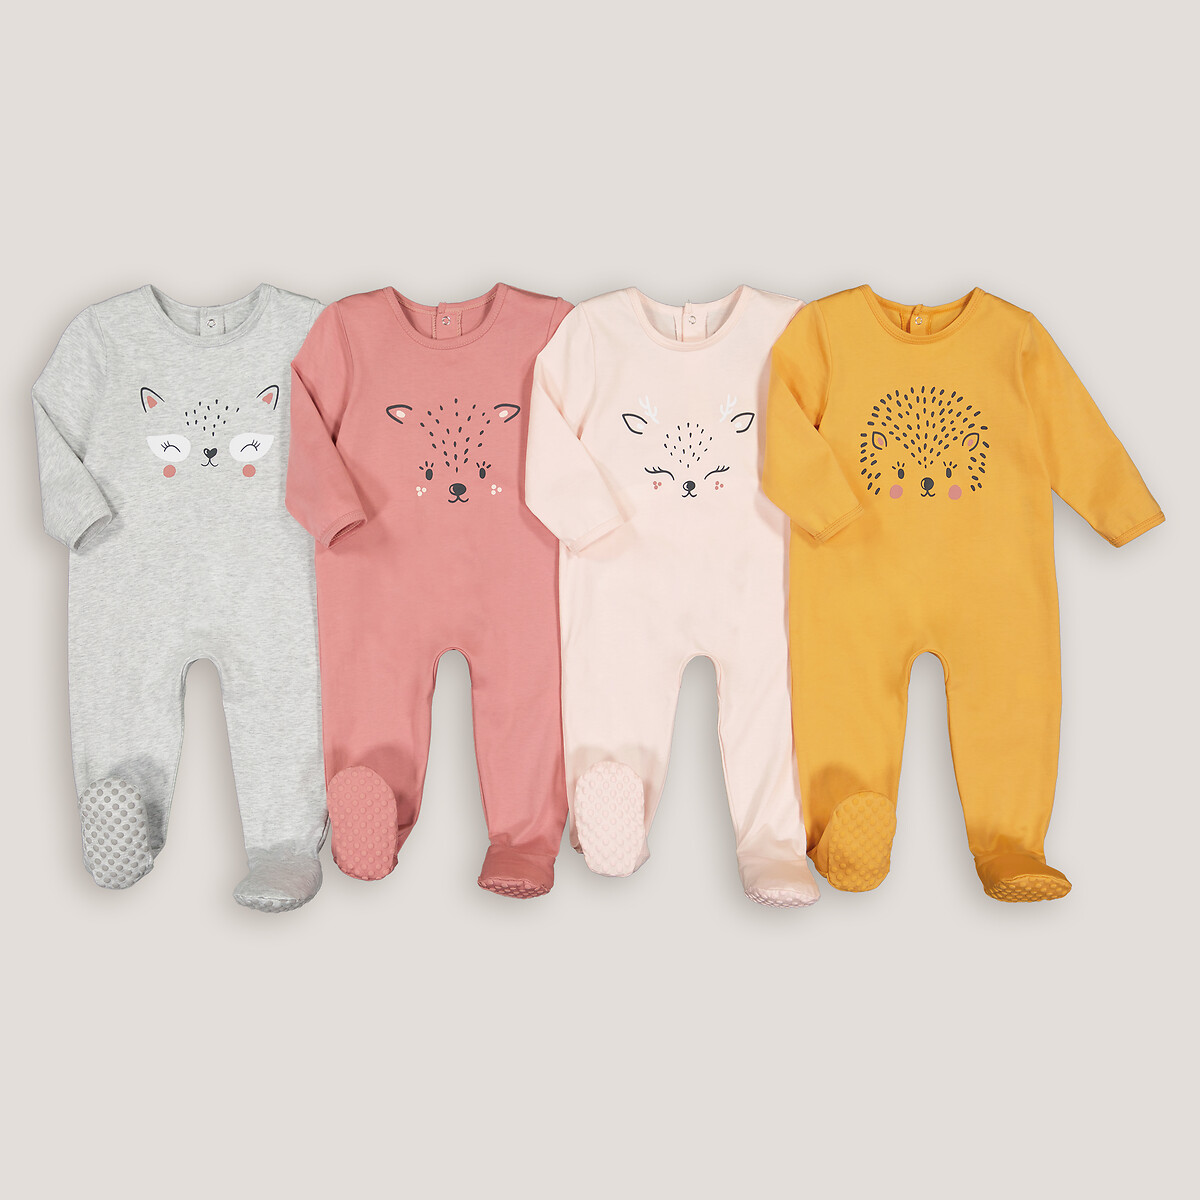 Pack of 4 Sleepsuits in Cotton with Animal Print